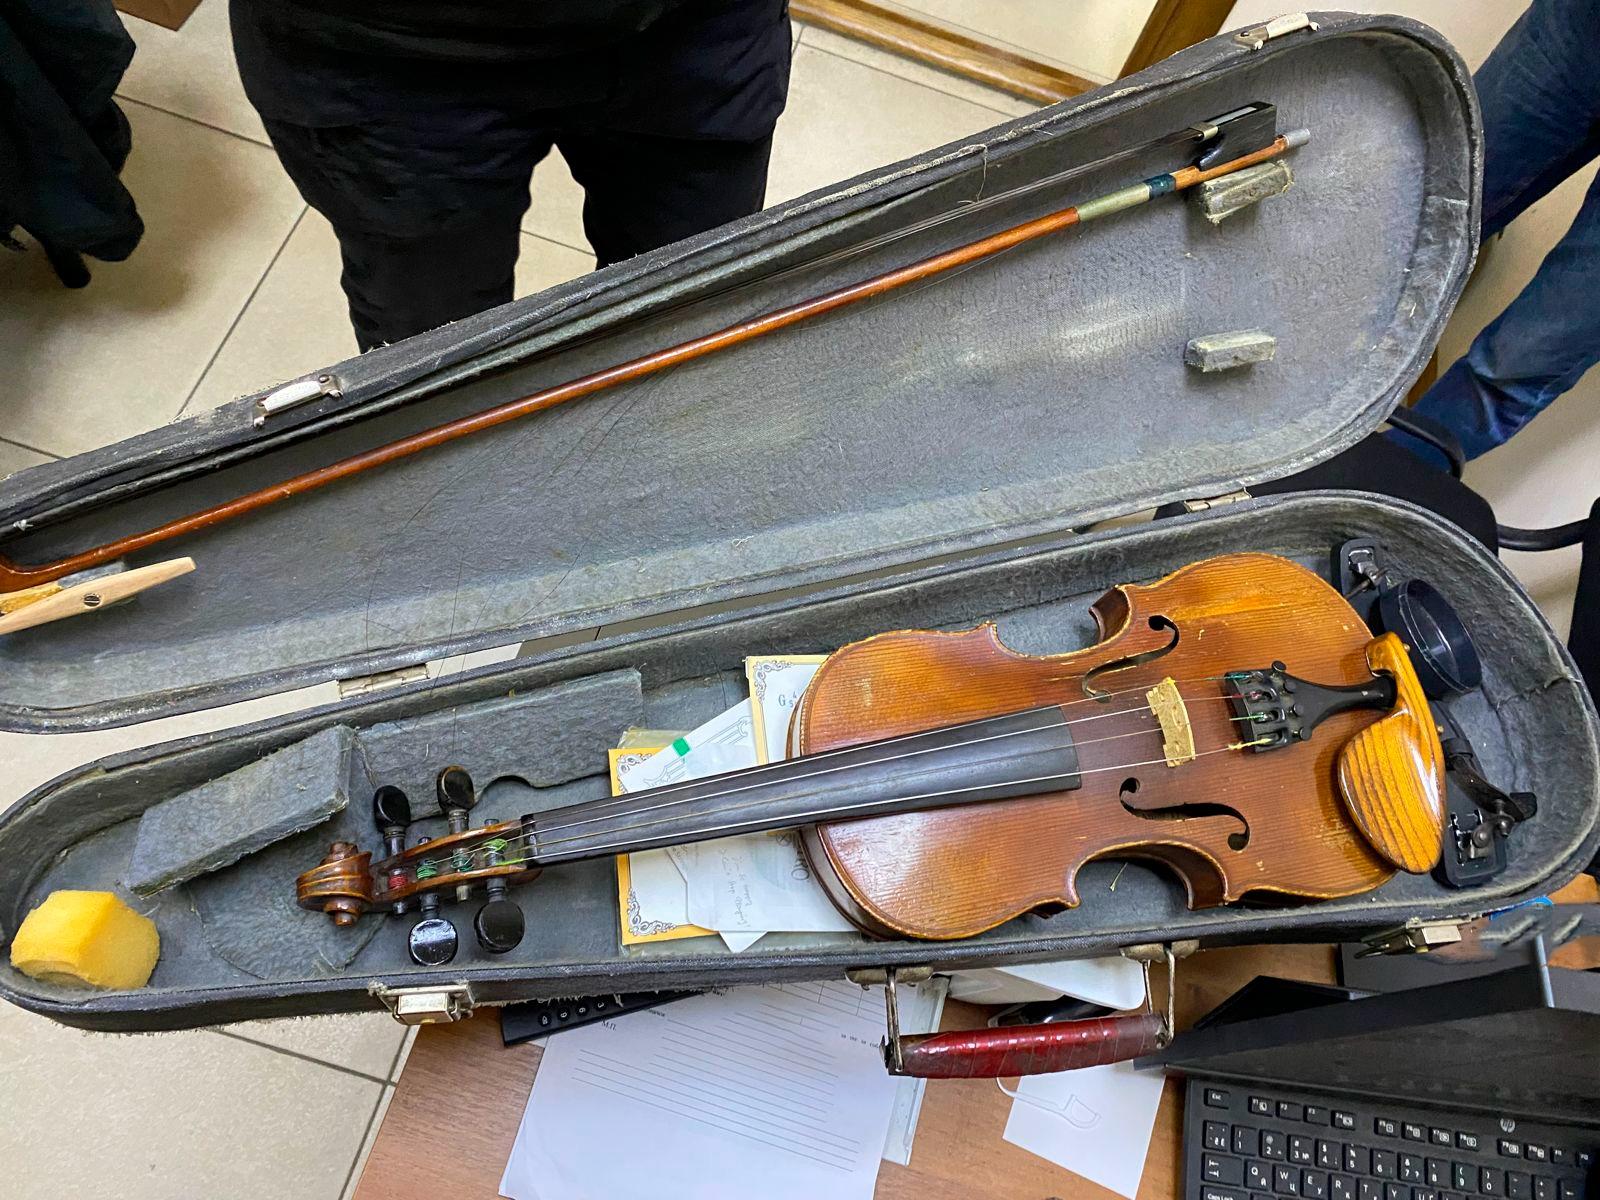 In the Odessa region, one tried to take the Stradivarius violin of 1742 abroad (photo)